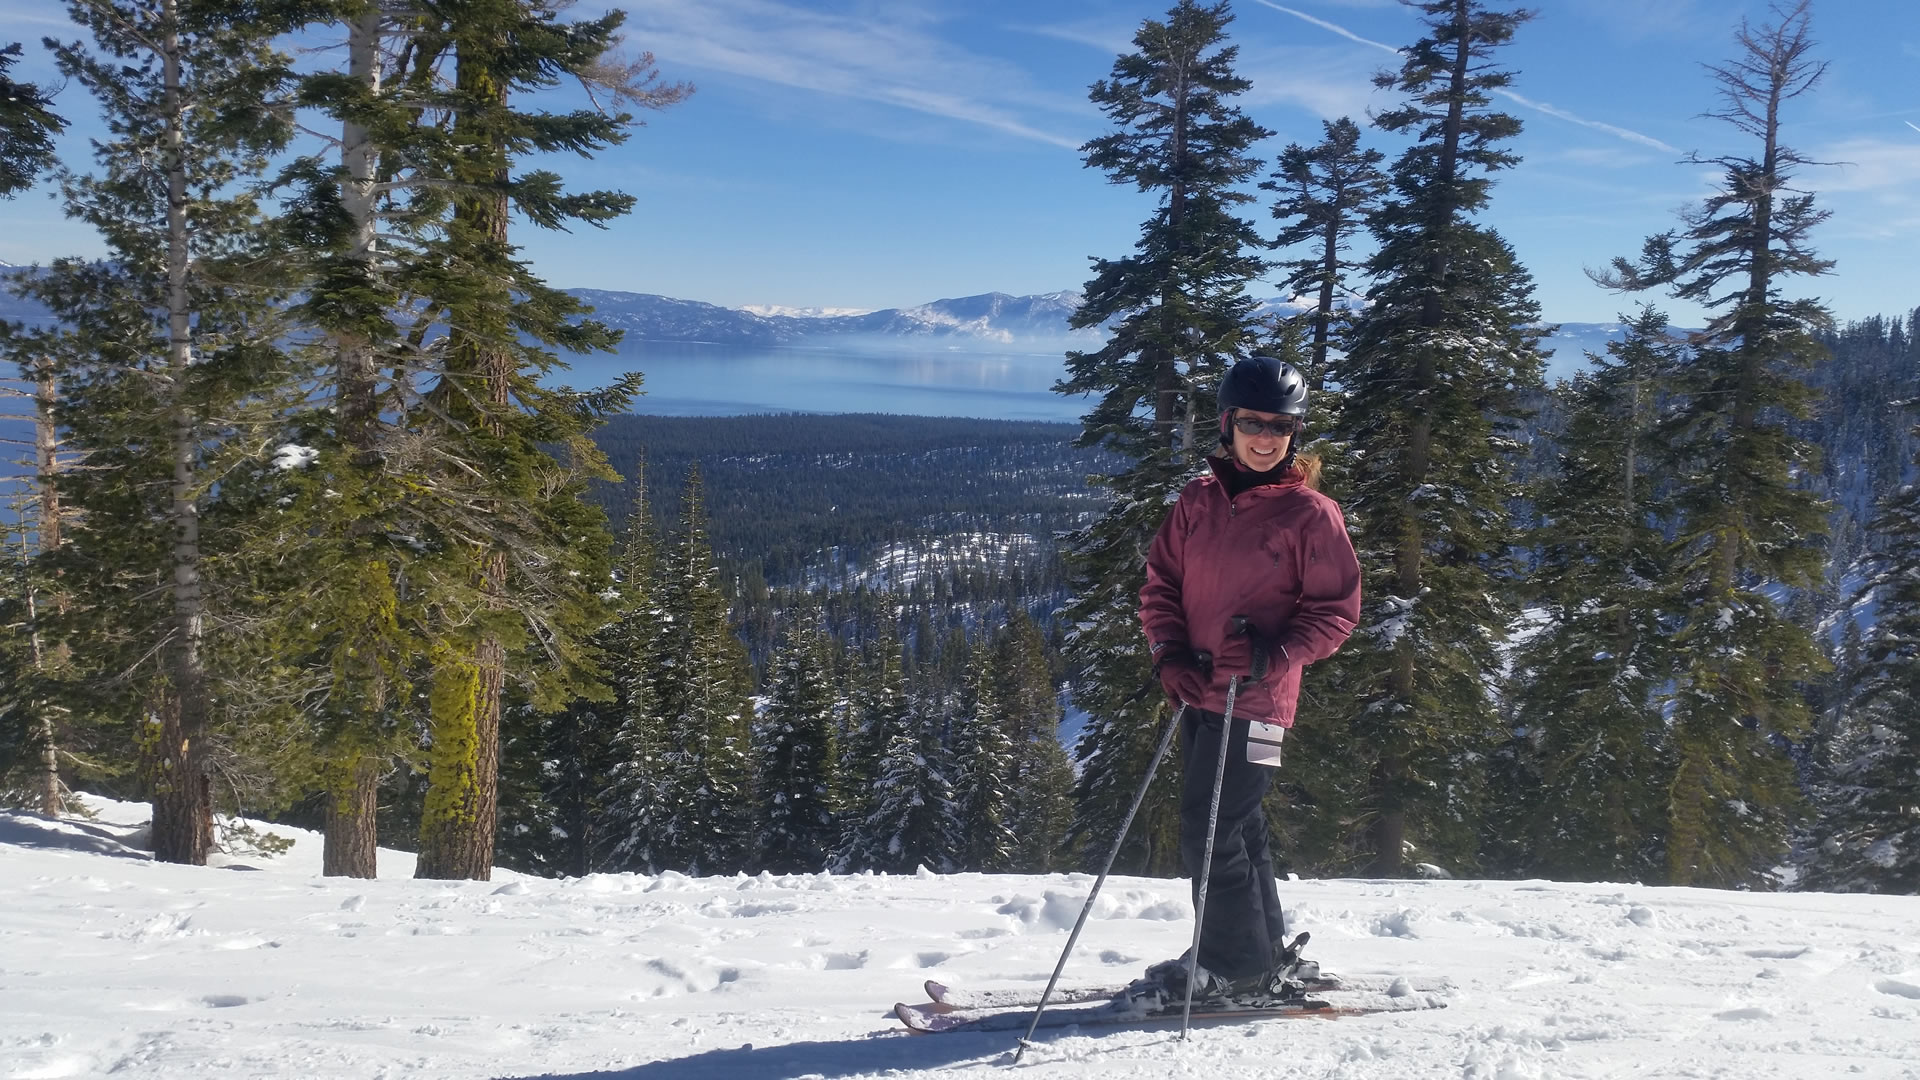 Ski Ride Private Lessons Lake Tahoe intended for how to ski tahoe cheap for Current Residence